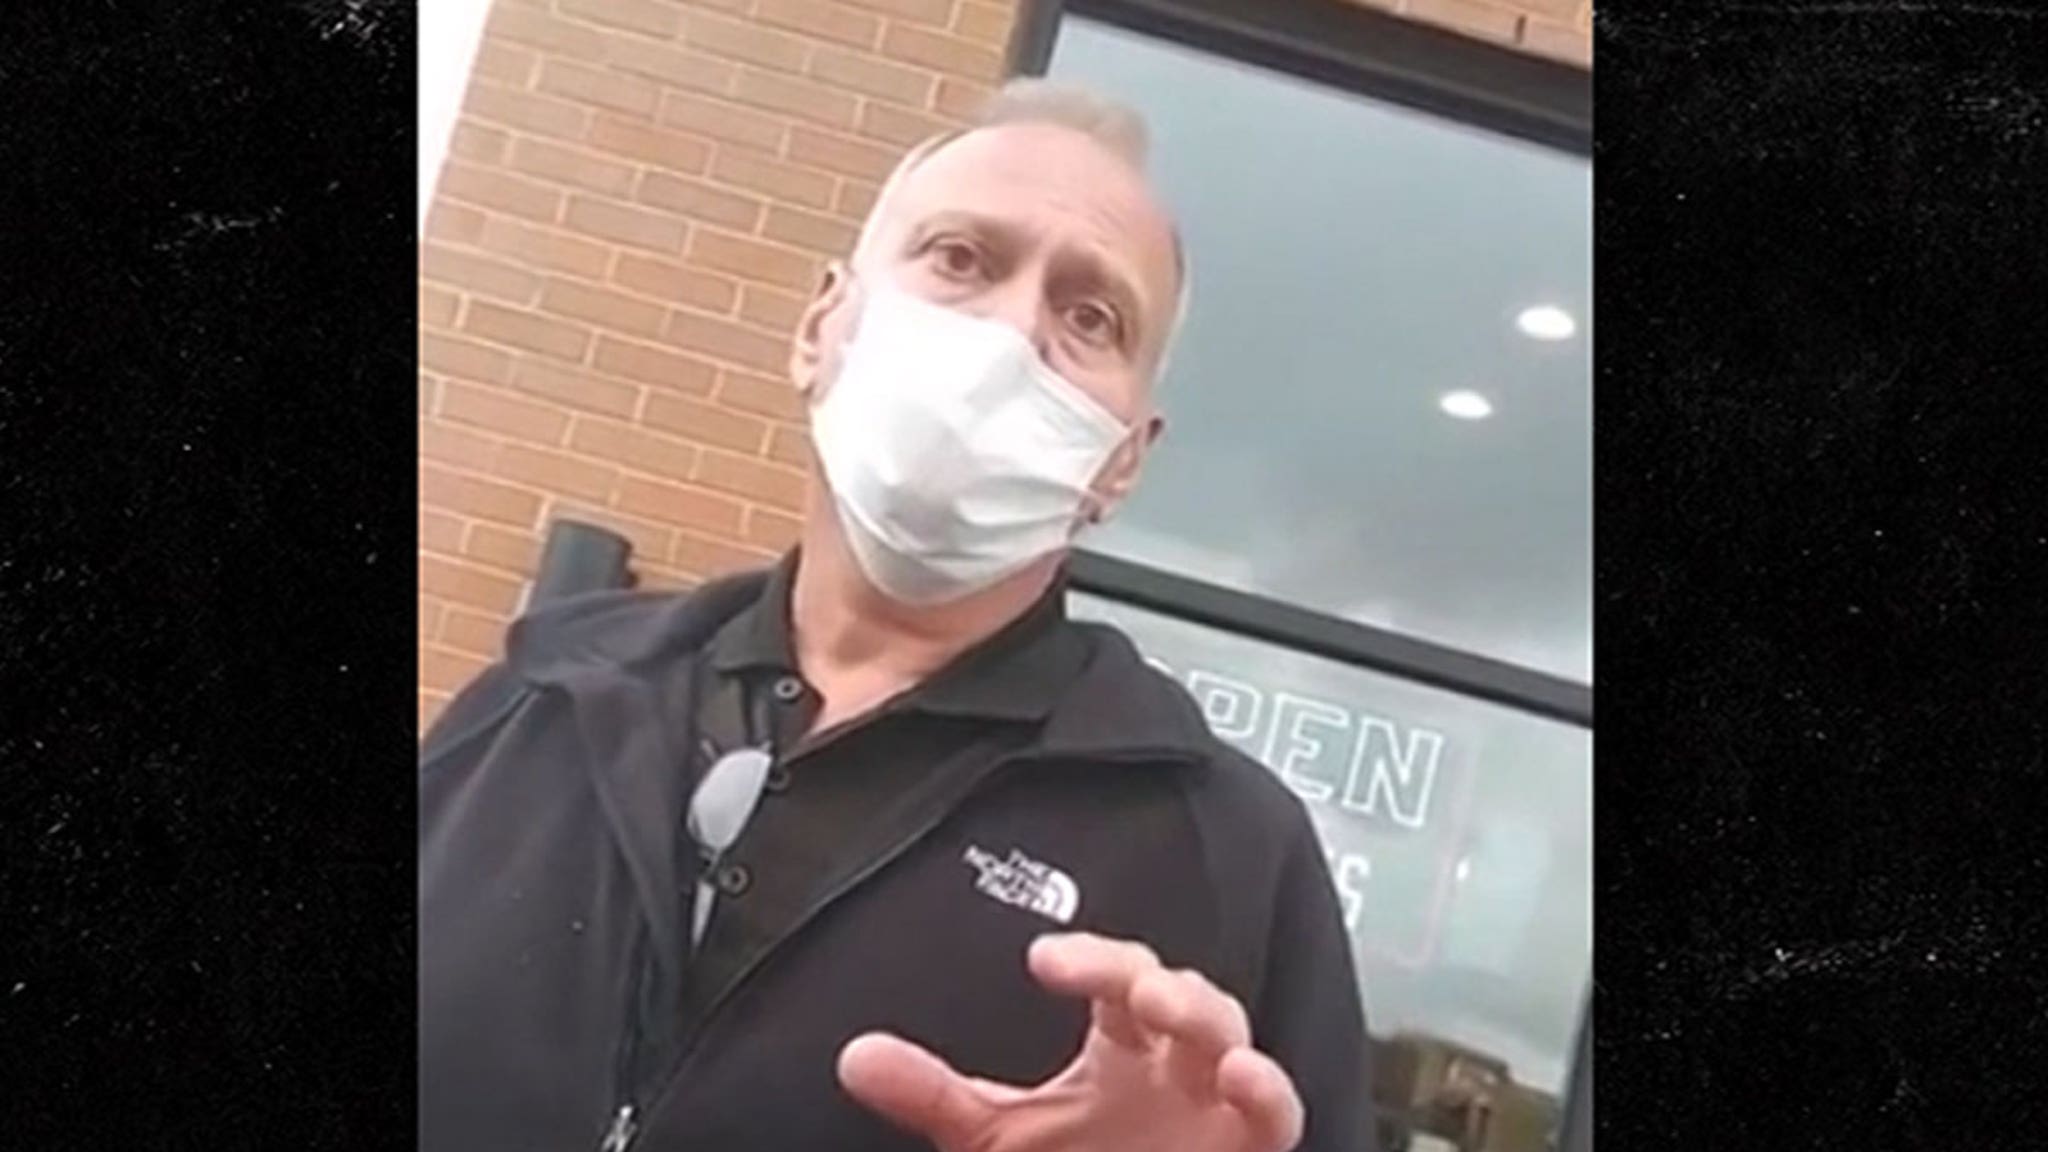 Pizza Delivery Man Fired Over BLM Mask, Gets Disorderly Conduct Ticket thumbnail